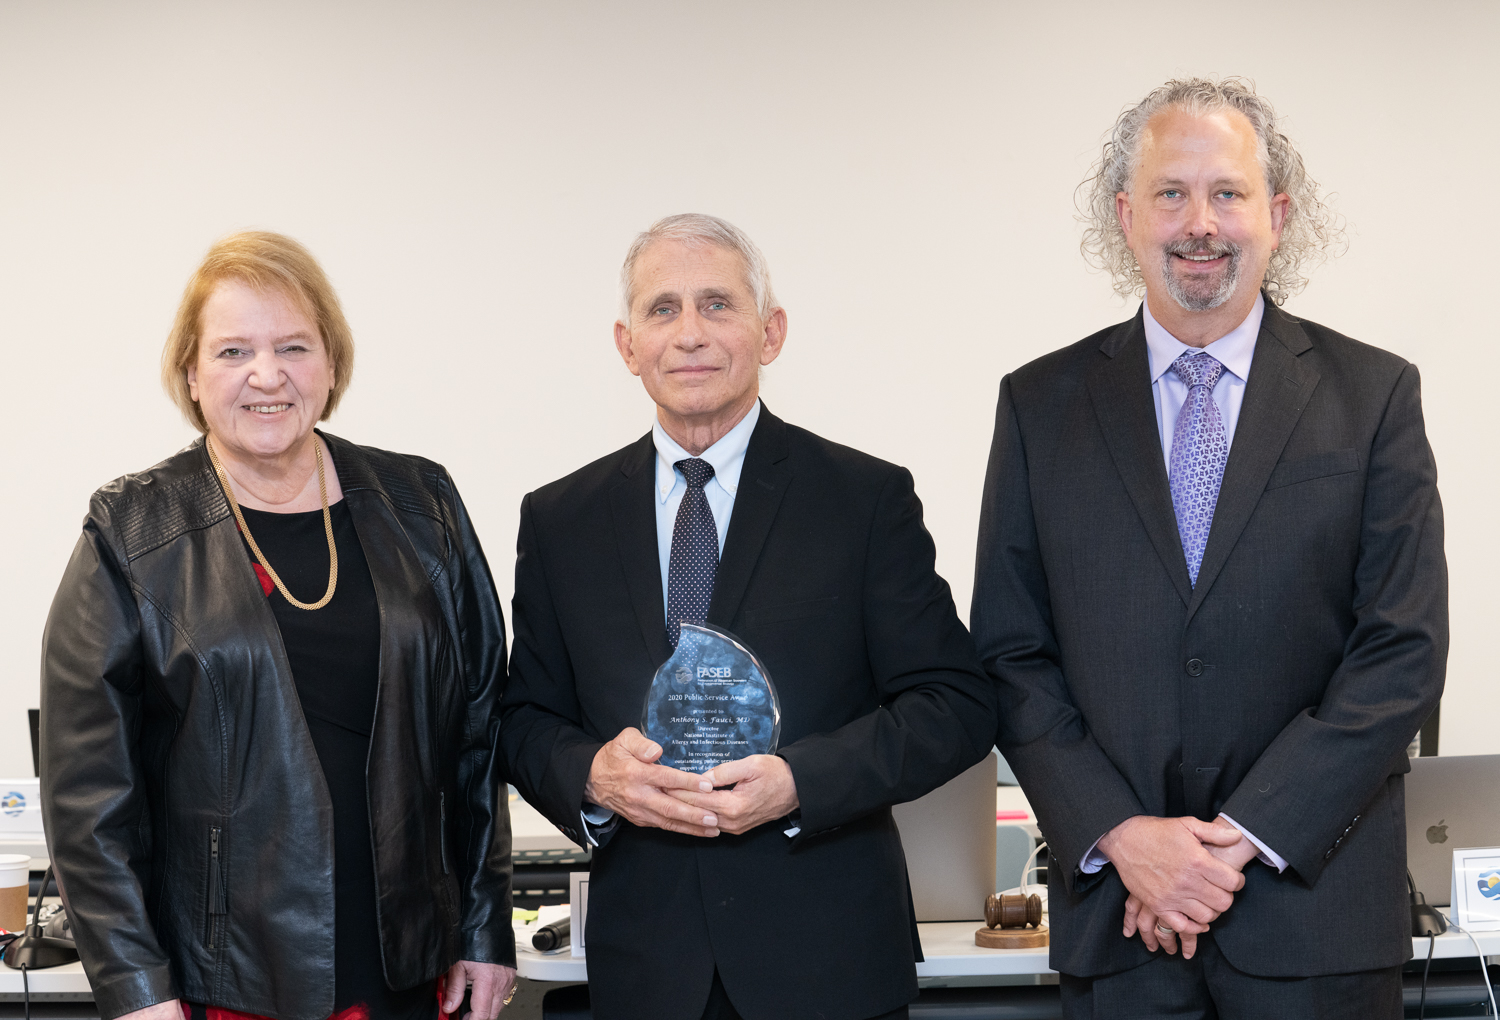 FASEB President Patricia Morris and Past President Louis Justement present the 2020 FASEB Public Service Award to Anthony Fauci.  